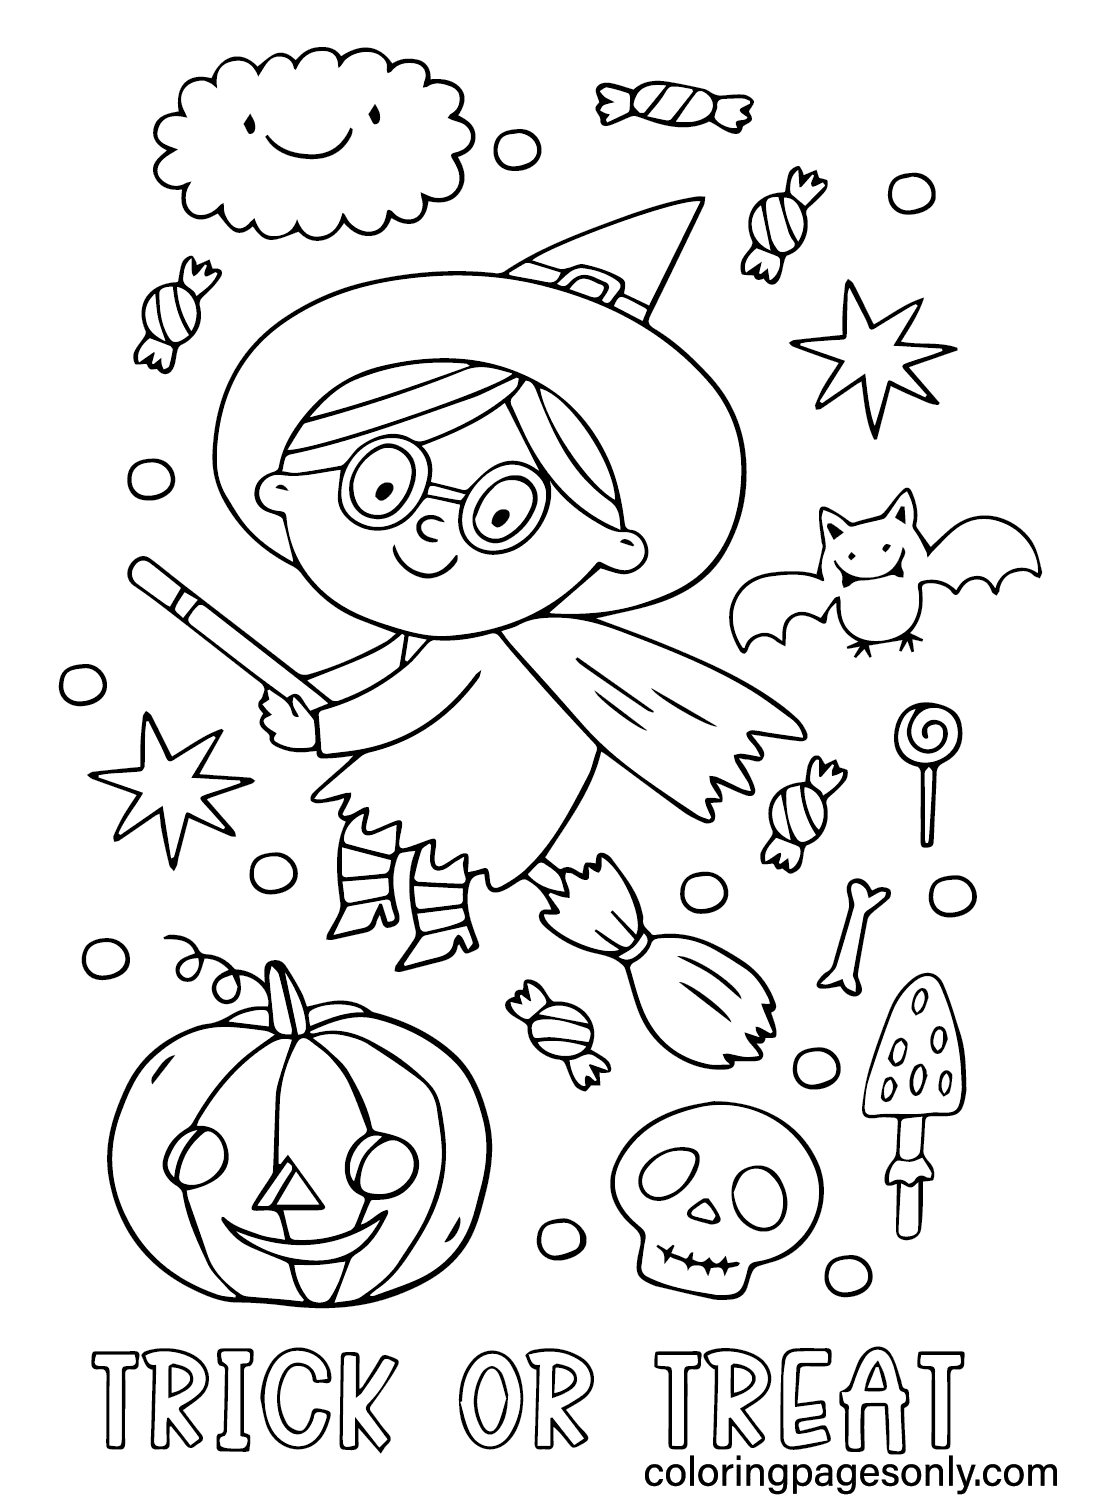 Trick or Treat Images to Color from Trick or Treat